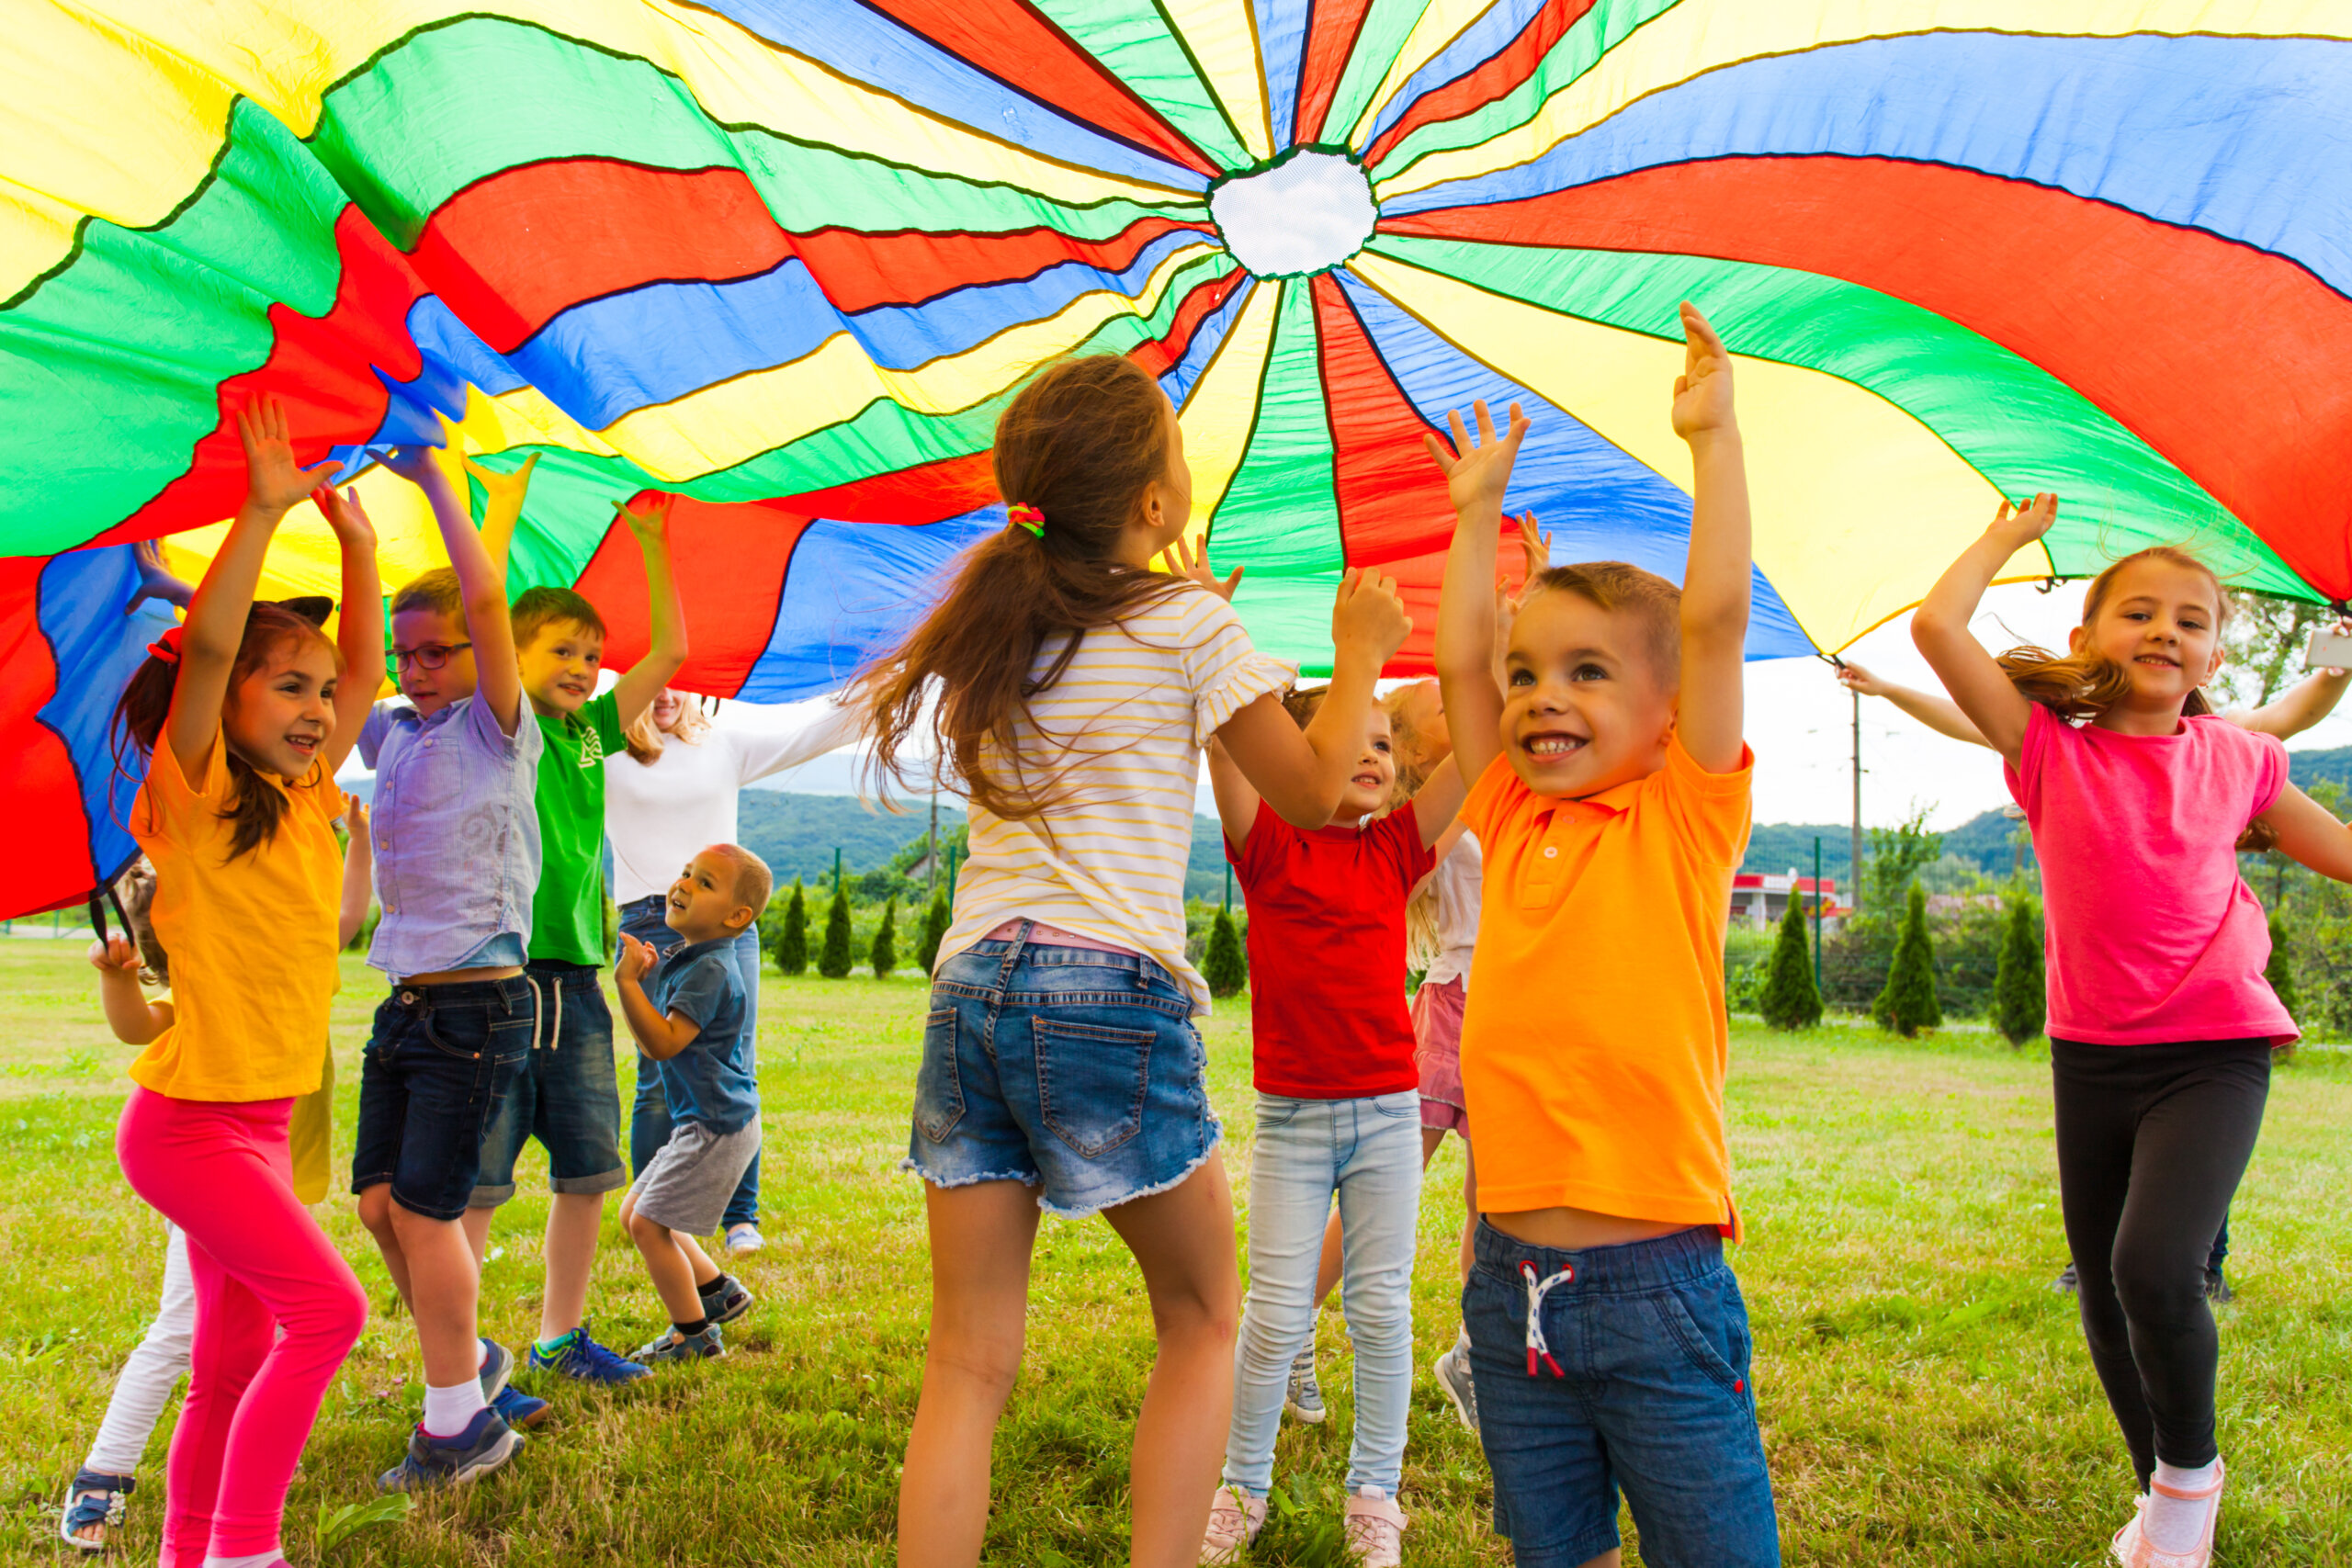 A group of children play outside under a colorful parachute.